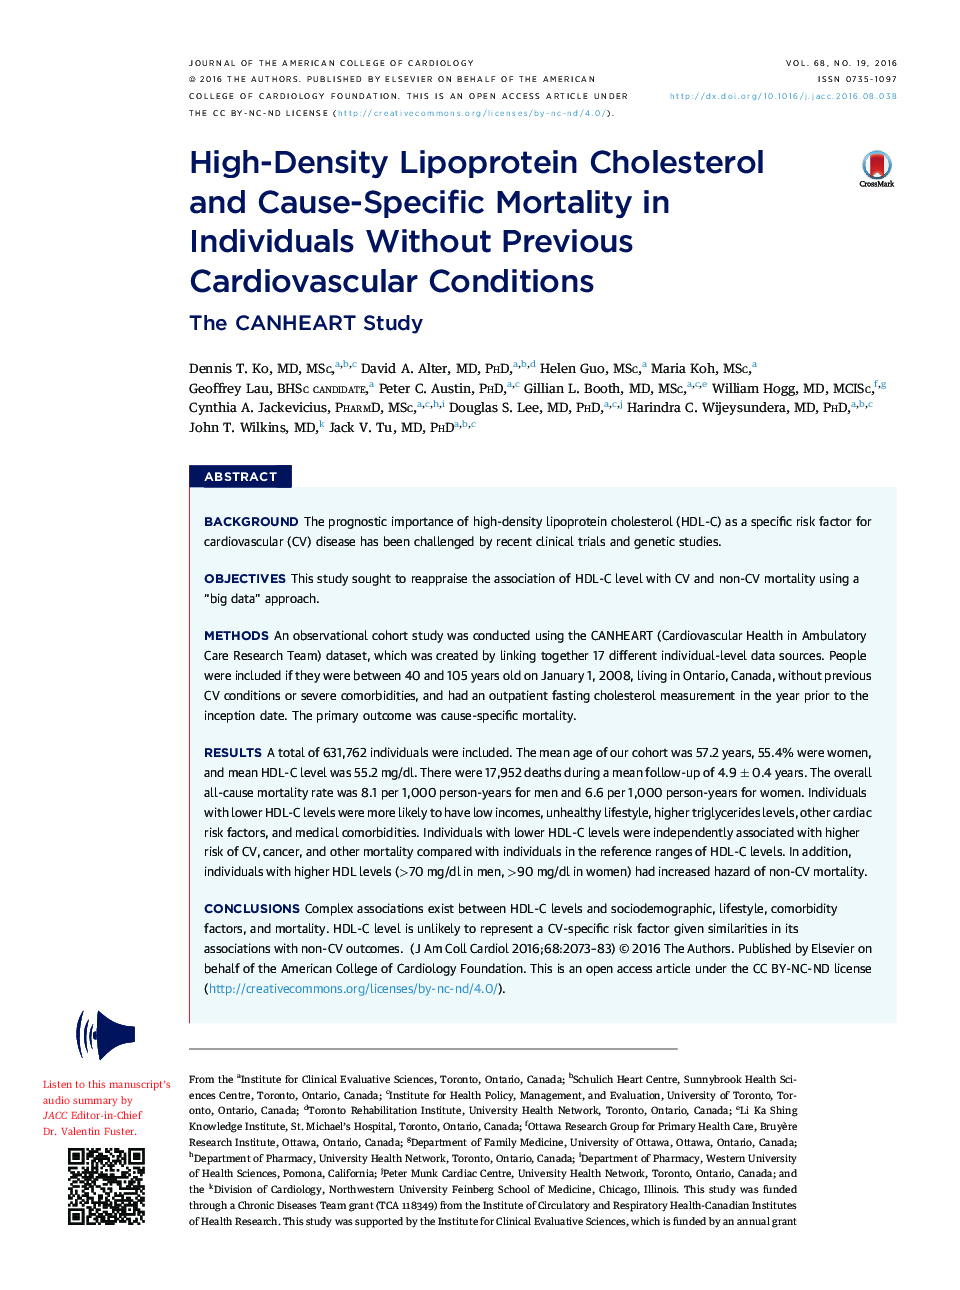 High-Density Lipoprotein Cholesterol andÂ Cause-Specific Mortality in IndividualsÂ Without Previous Cardiovascular Conditions